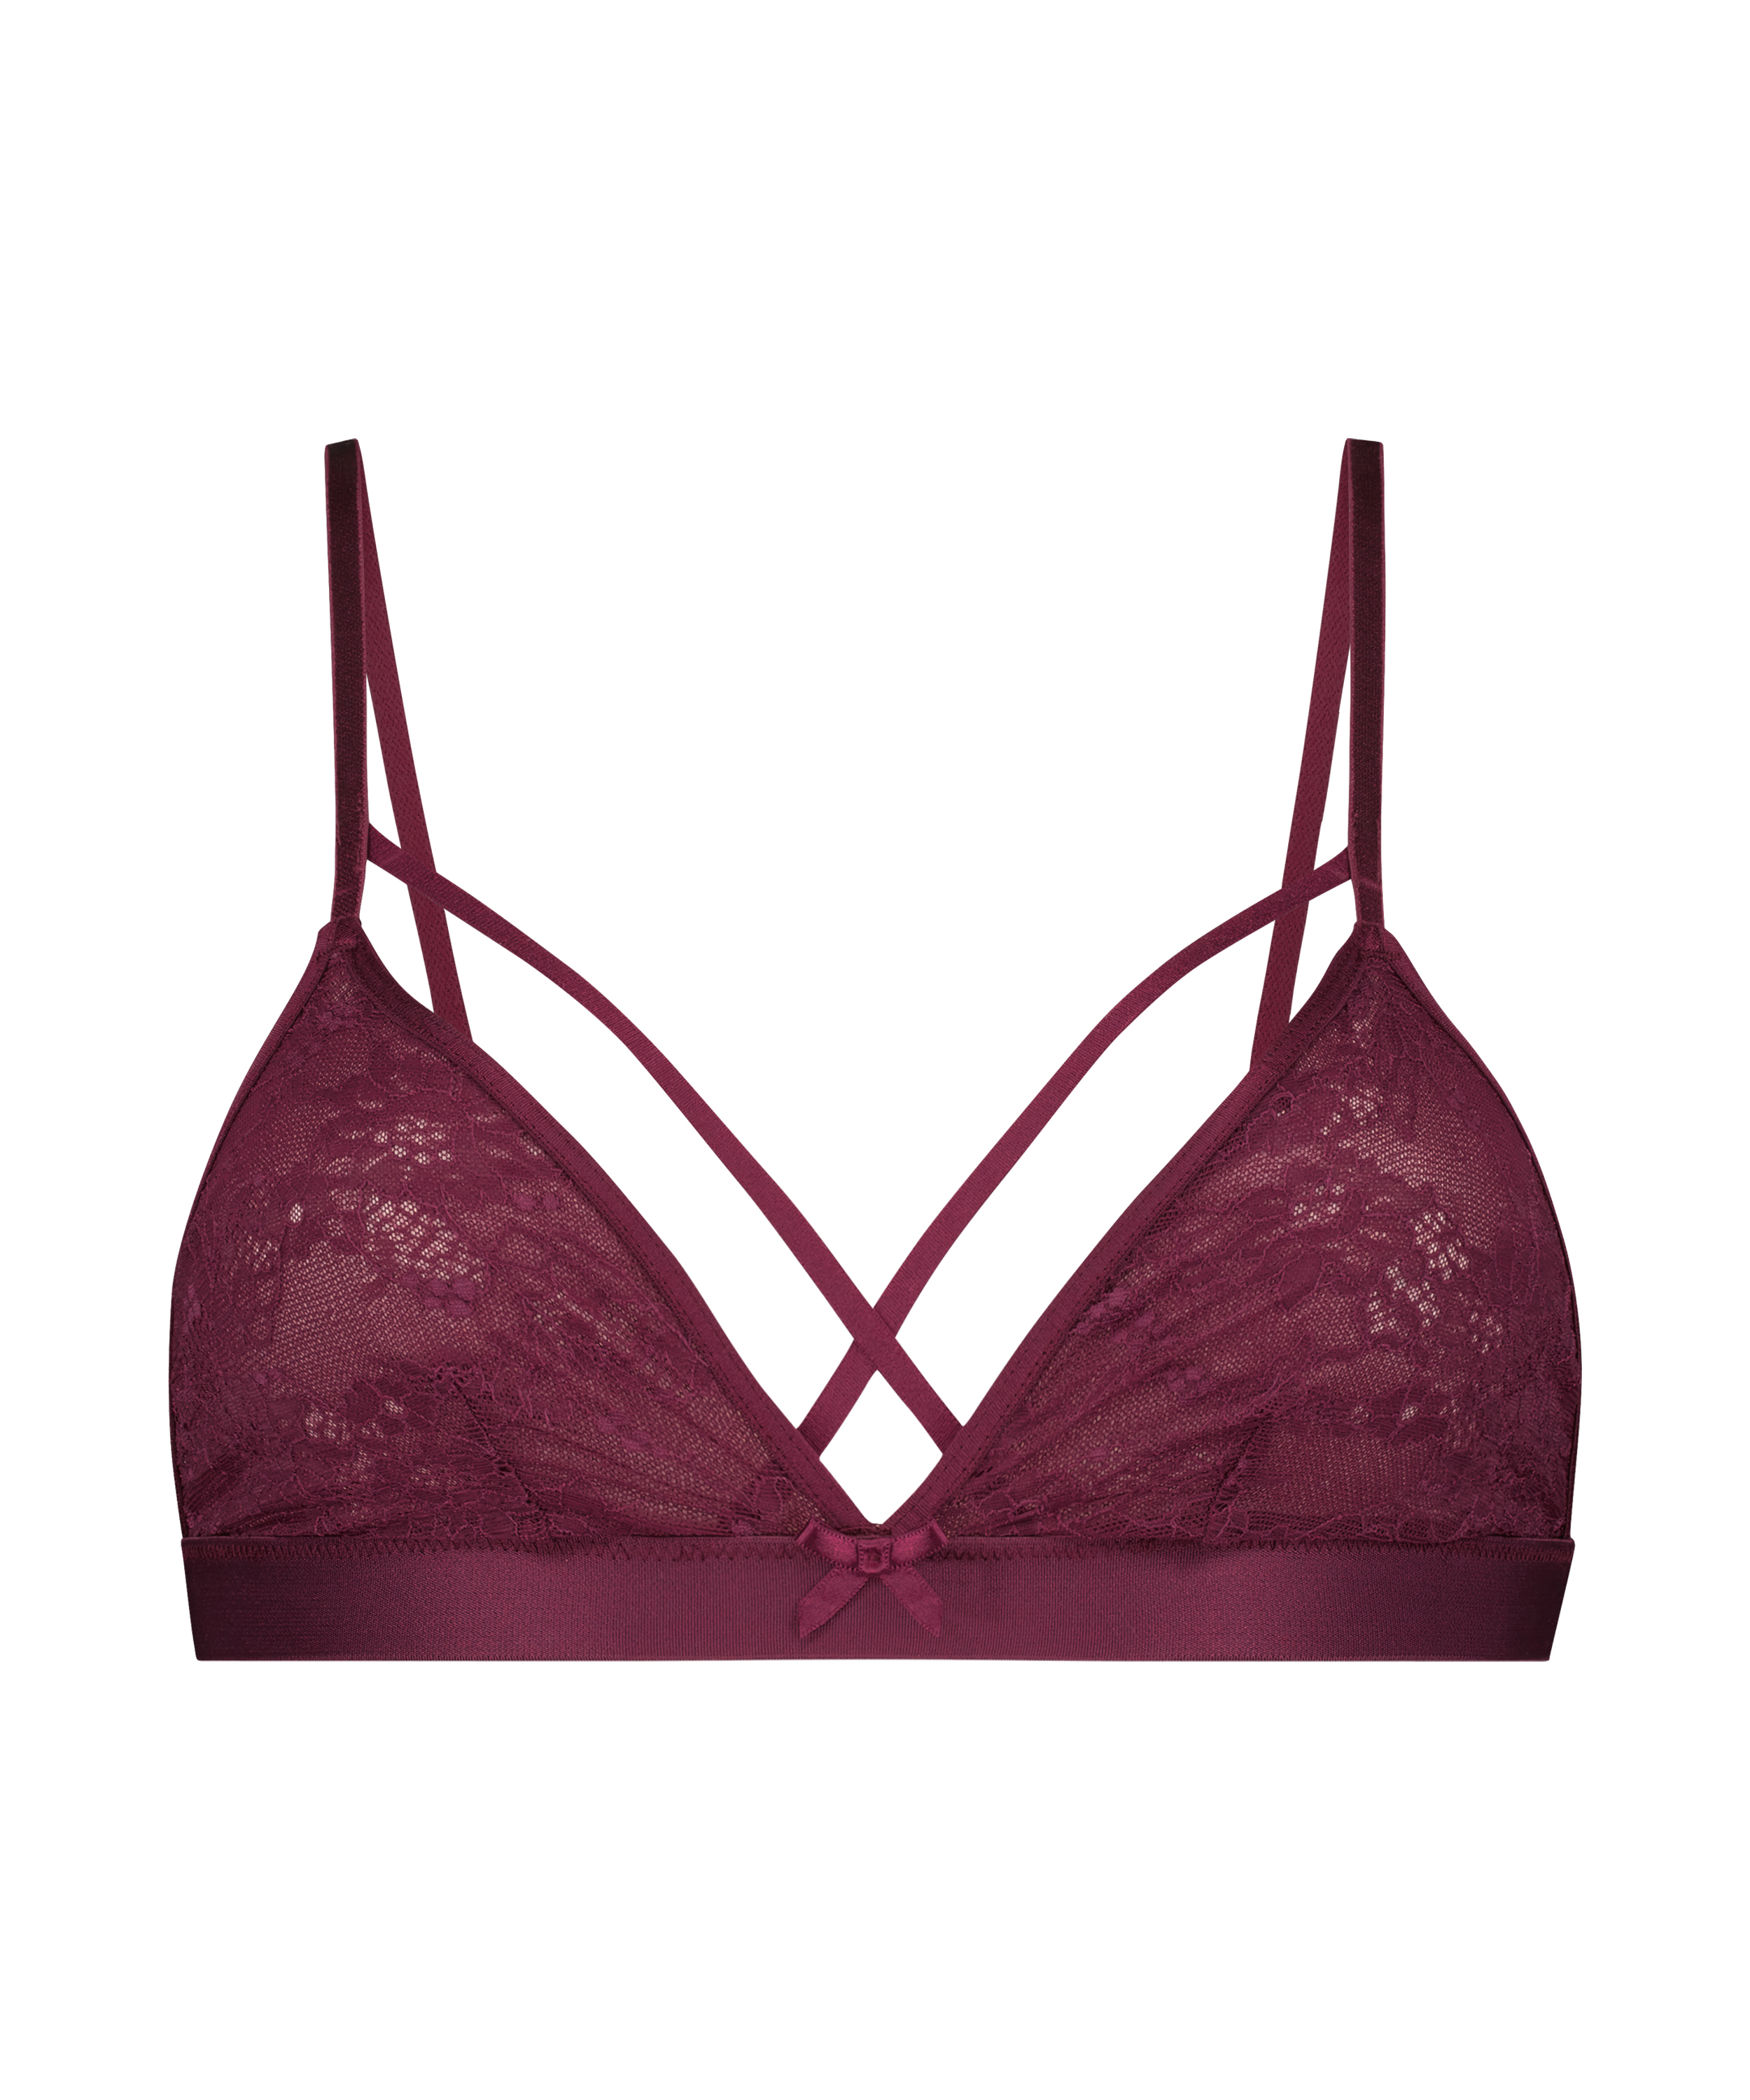 Bralette Corby, Rood, main